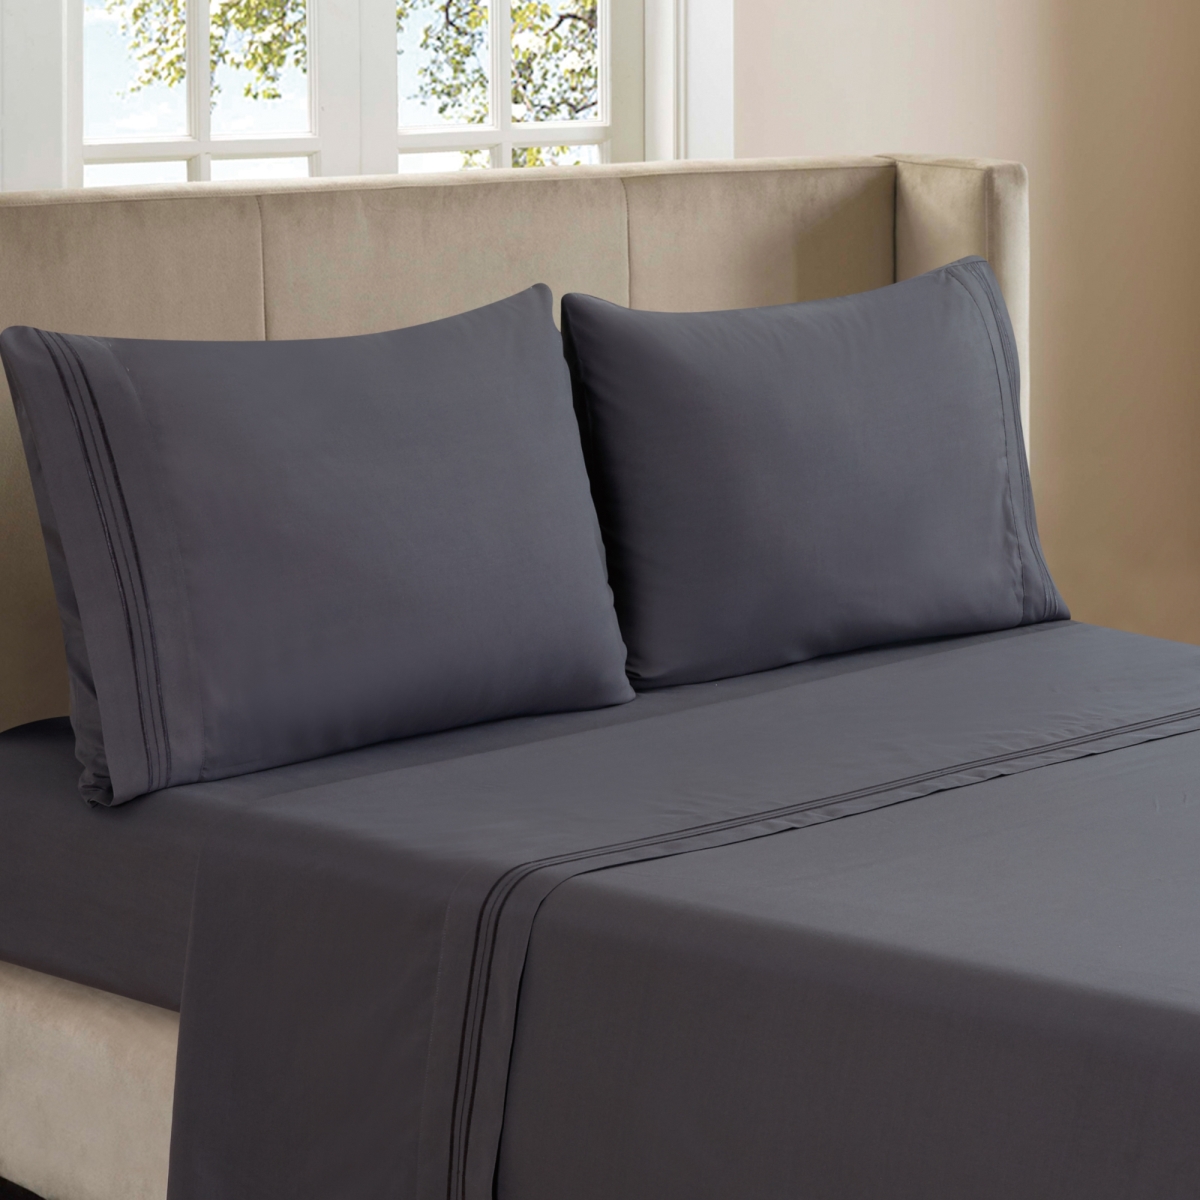 Whtx607-gyk 3-line Embroidered Grey Polyester Sheet Set - King Size - 4 Piece